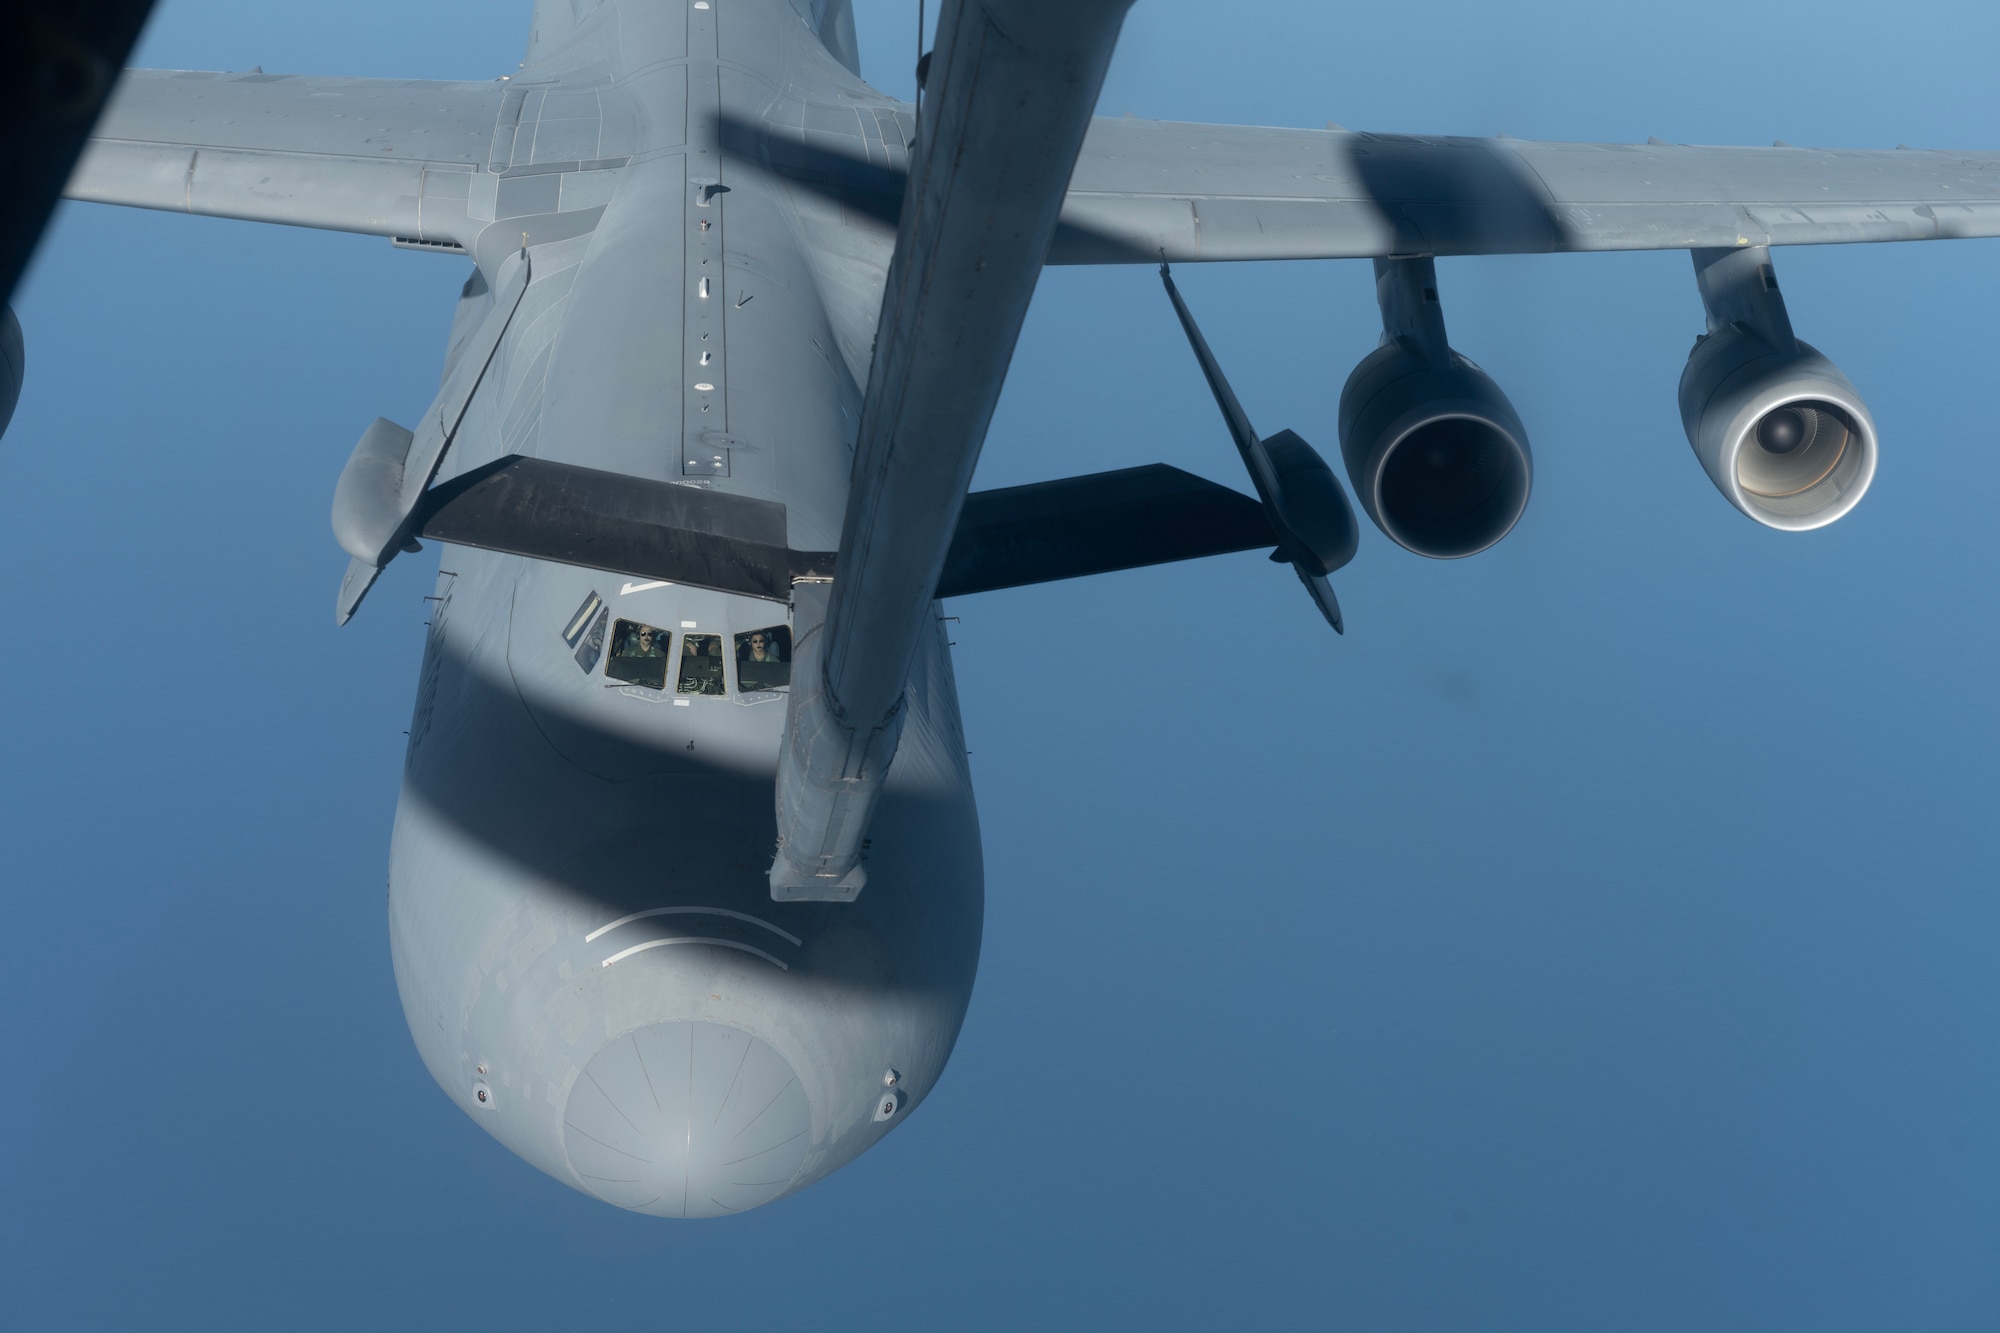 A large military aircraft approaches another military aircraft